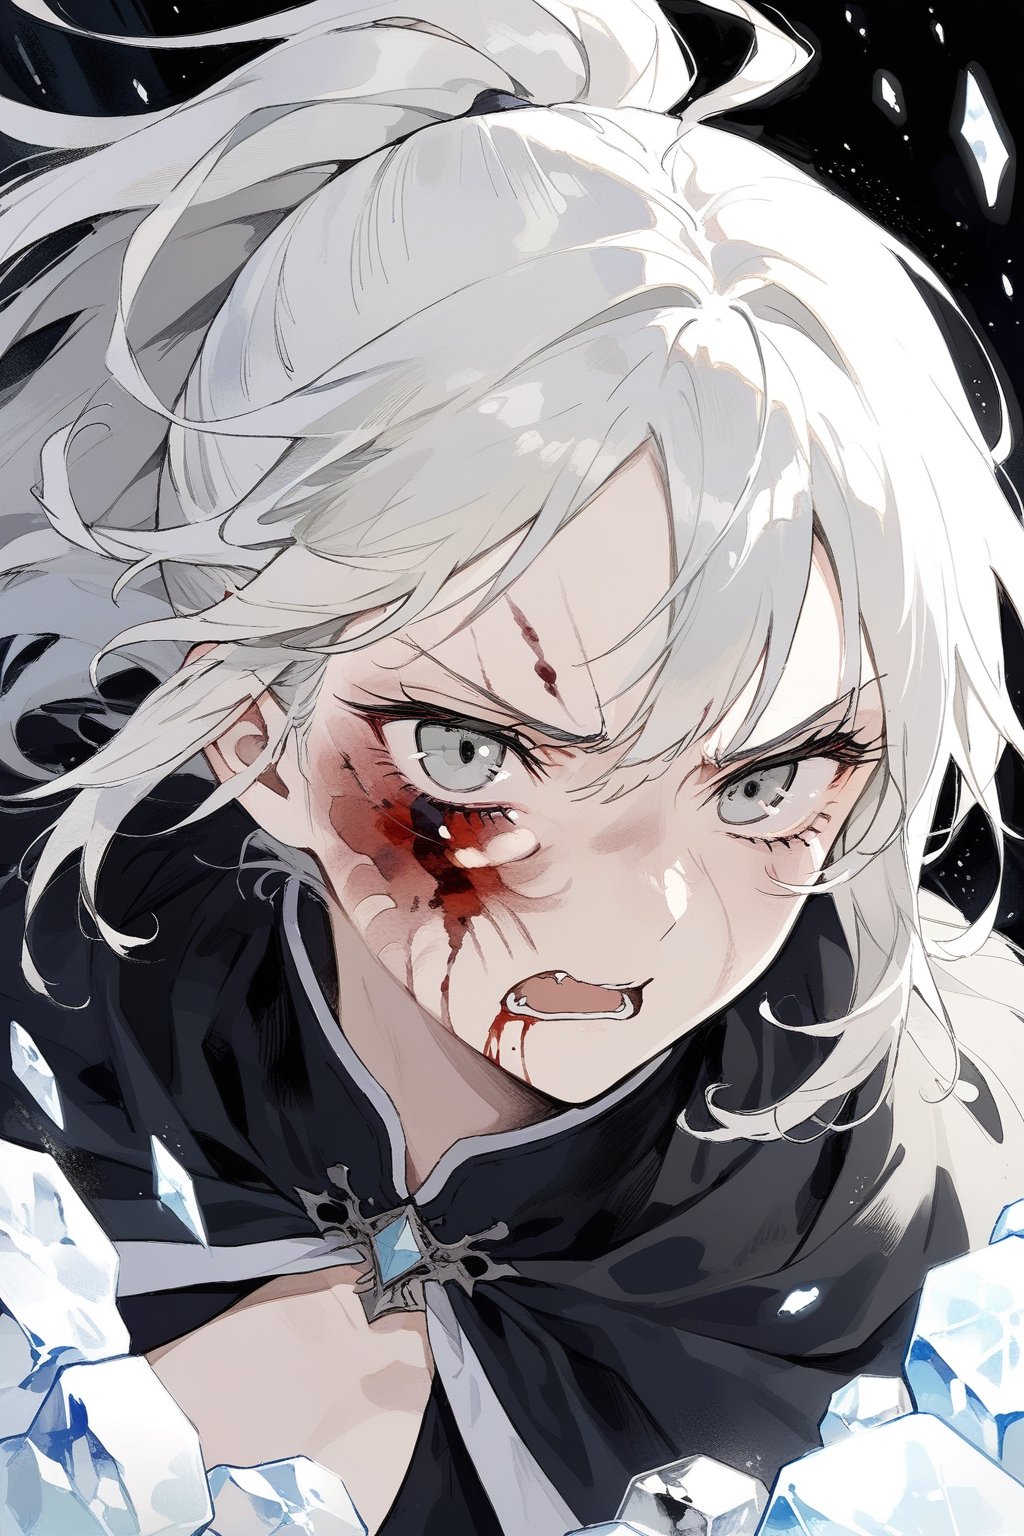 white hair in a ponytail with bangs, grey eyes, threatening eyes, angry, battlefield, black robes, masterpiece, best quality,aesthetic,dark art,blood on face, wounds, more detail XL, desperation, Ice magic, ice,